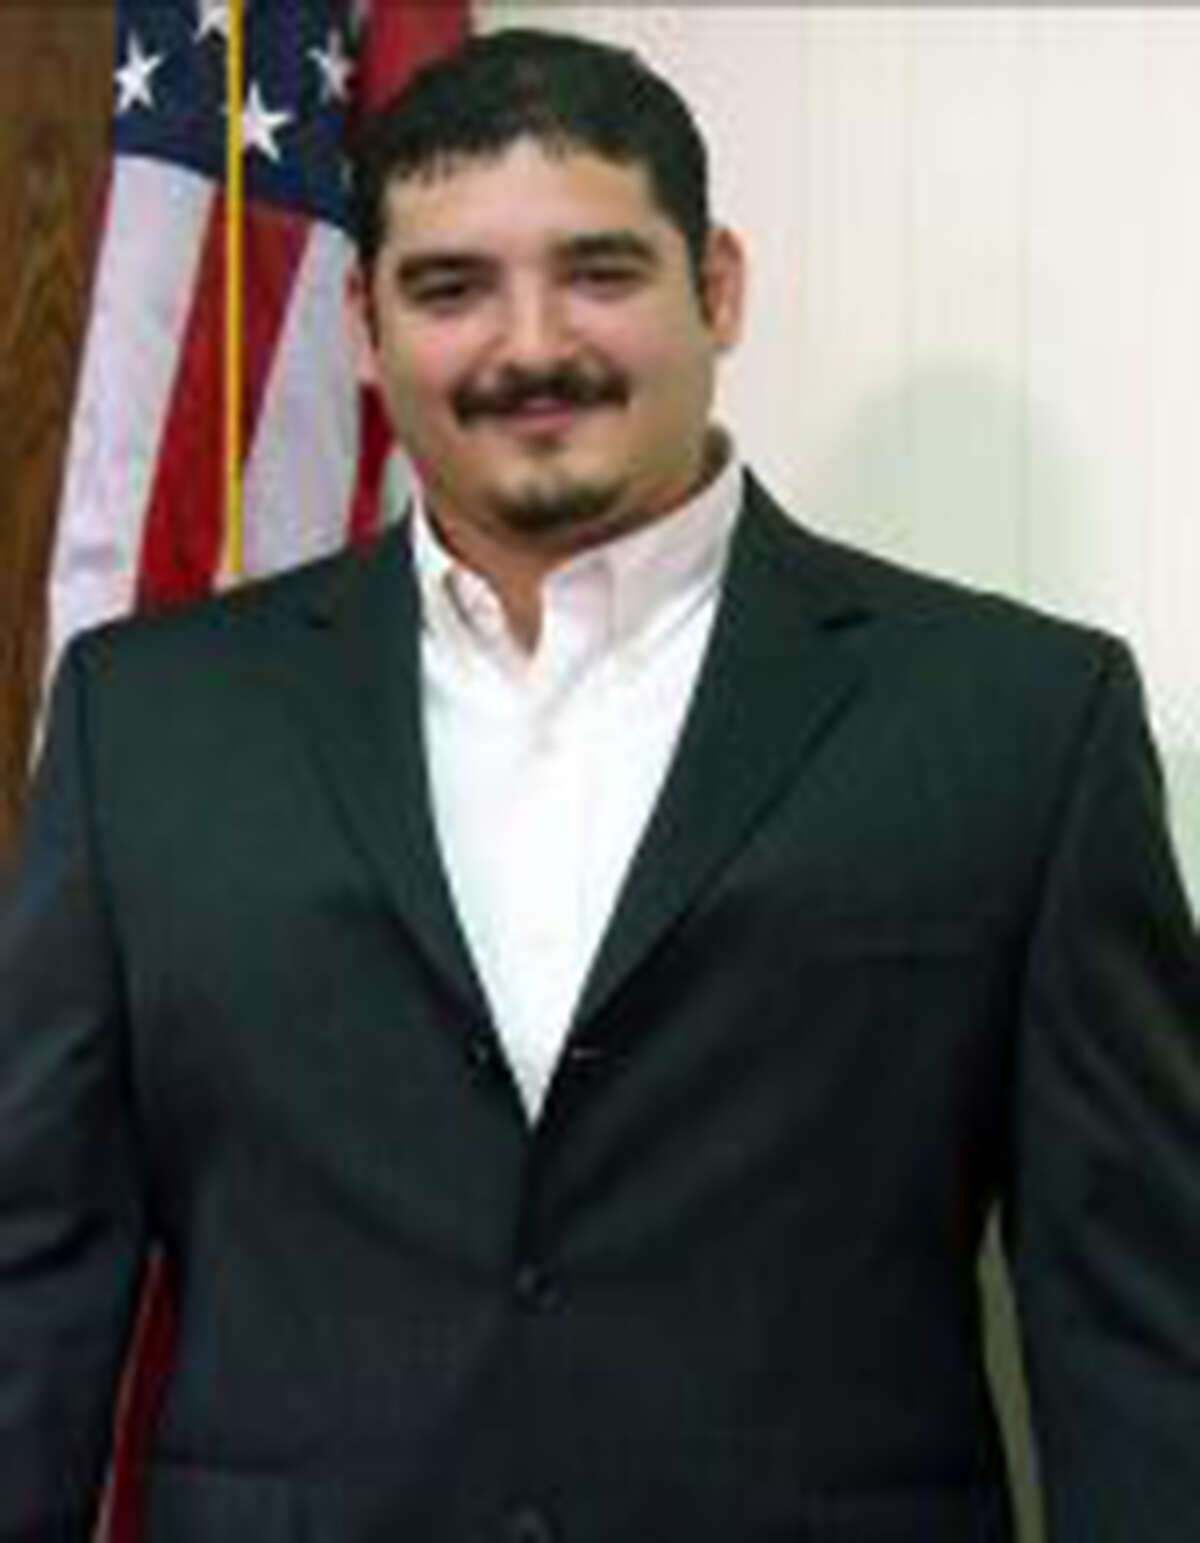 Michael Vela, the president of the Progreso school board, and his brother Omar Vela - the town mayor - were charged Wednesday in a public corruption case. Picured here is Michael Vela.